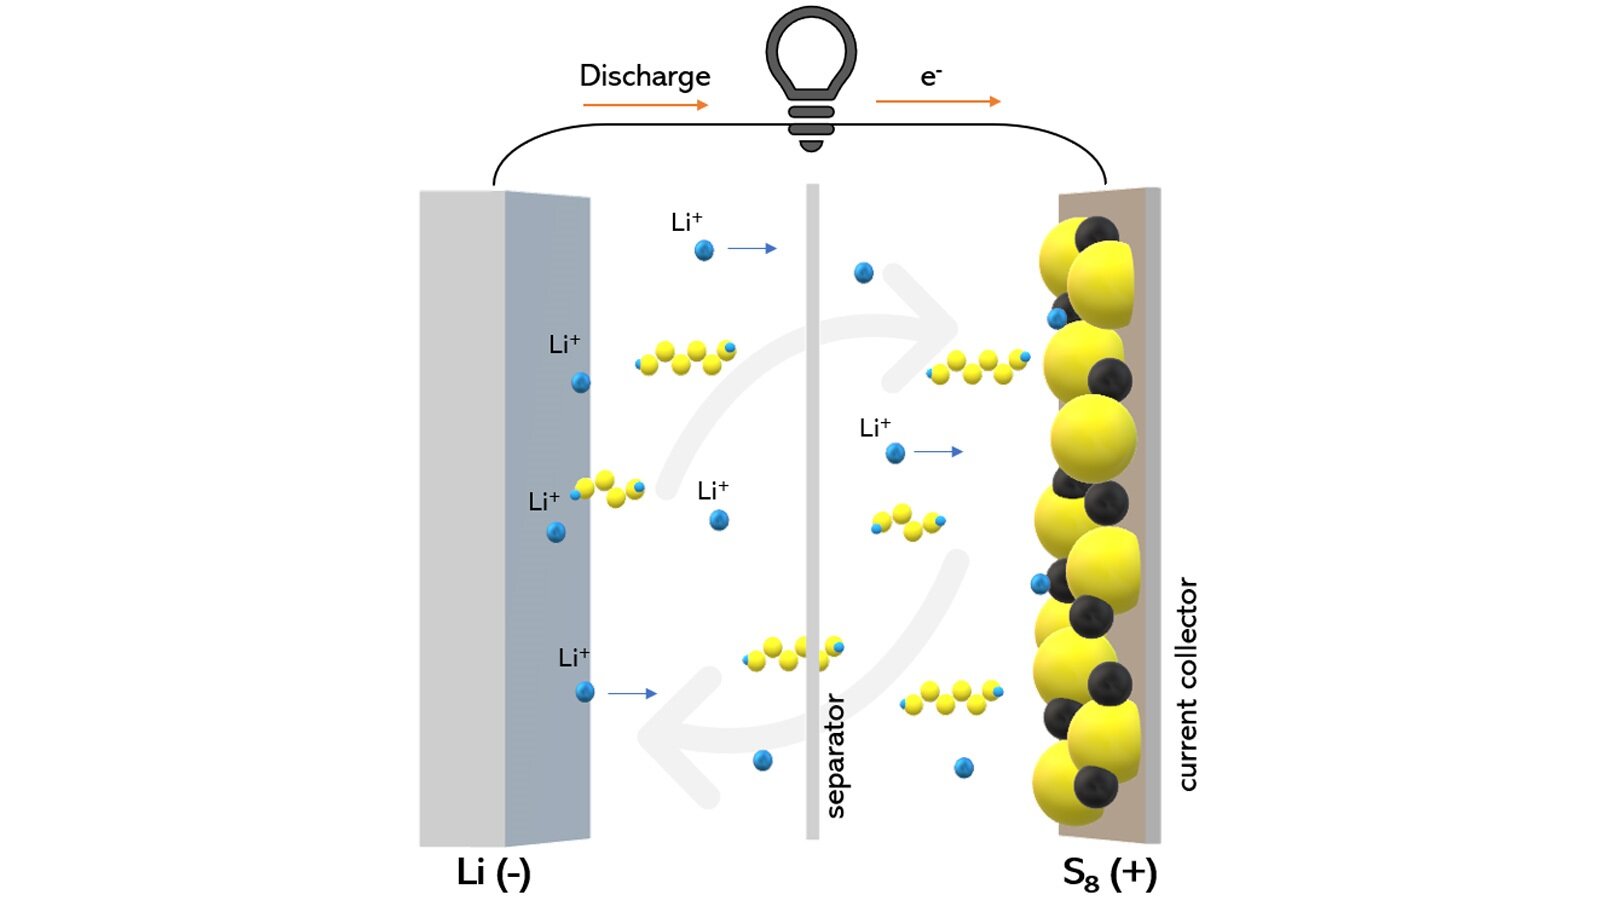 Scientists put the "solve" in "solvent" for lithium-sulfur battery